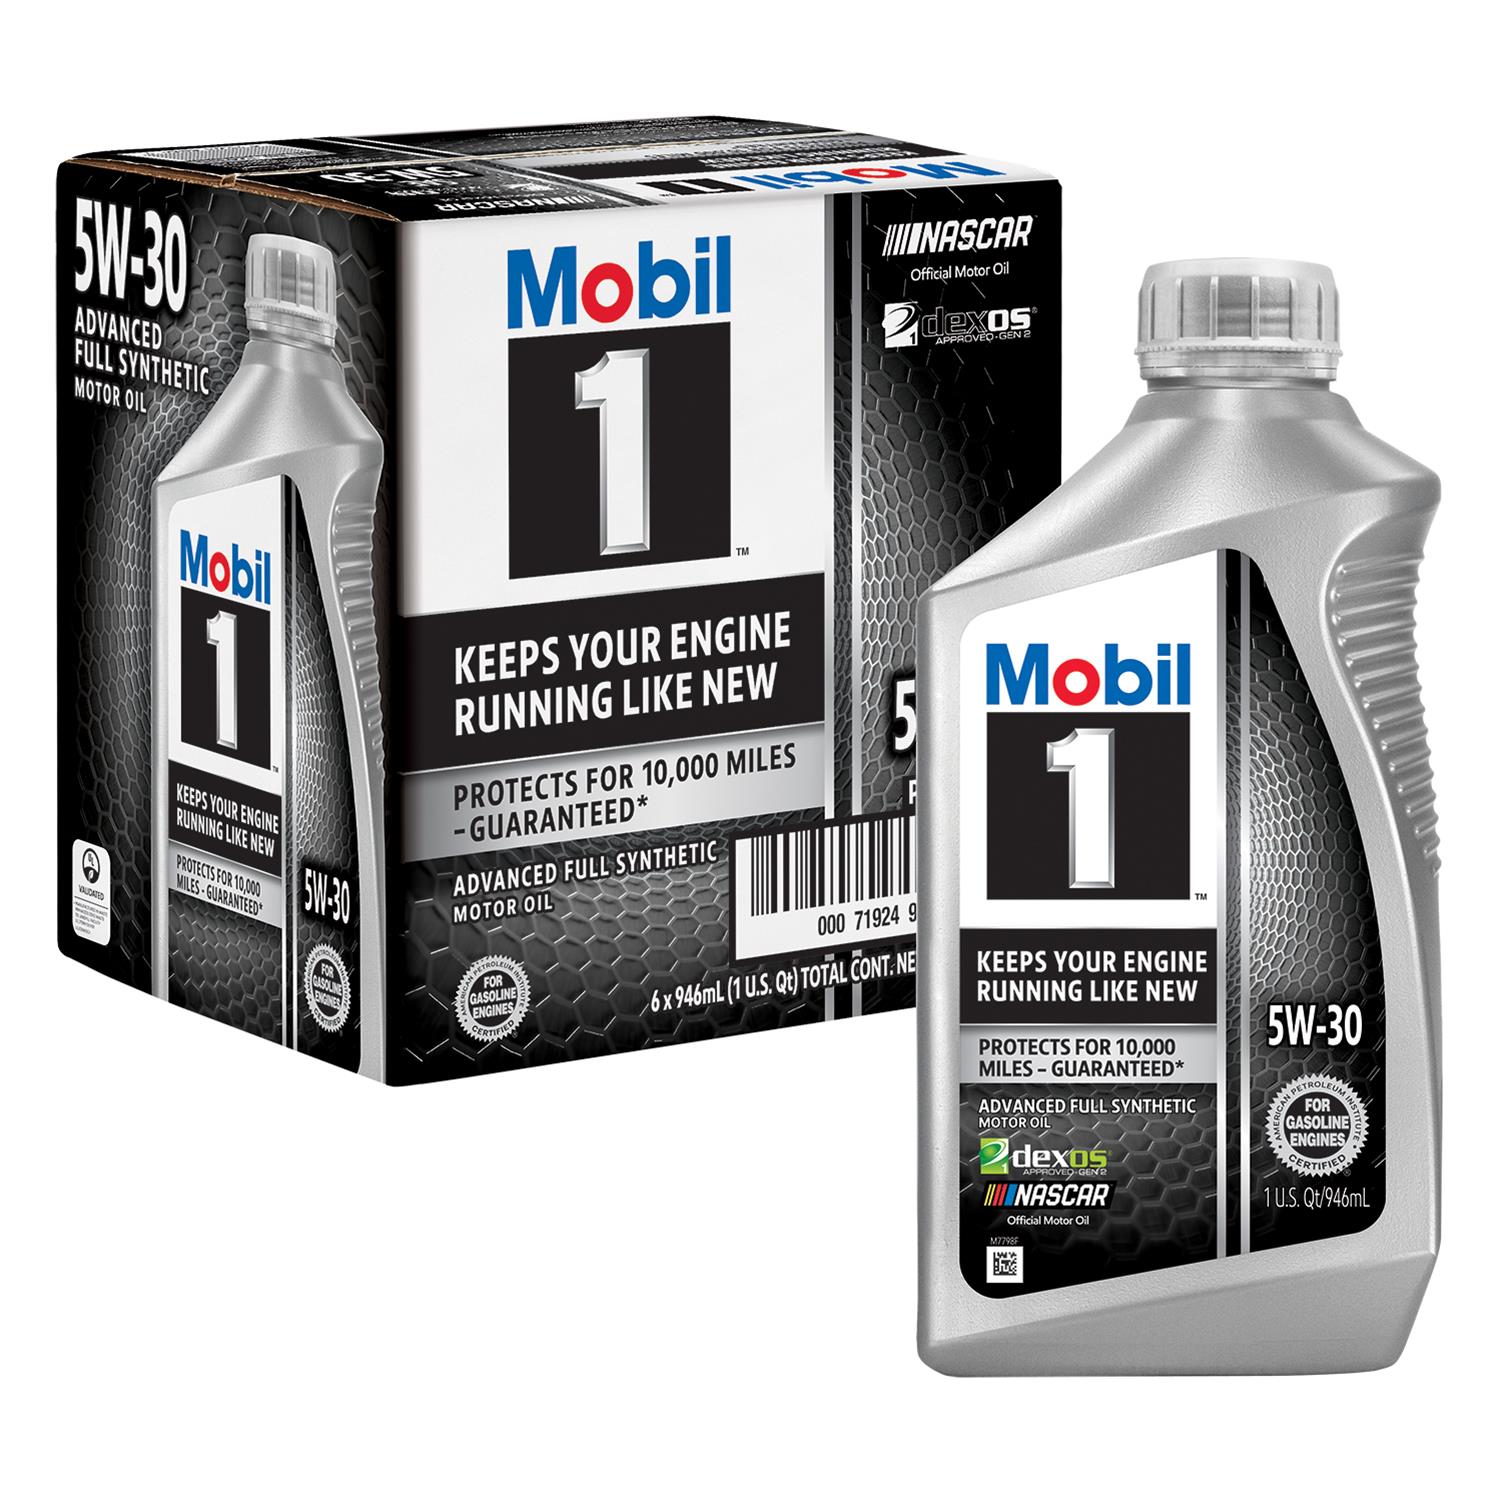 Mobil 1 124315 Mobil 1 Synthetic Motor Oil | Summit Racing